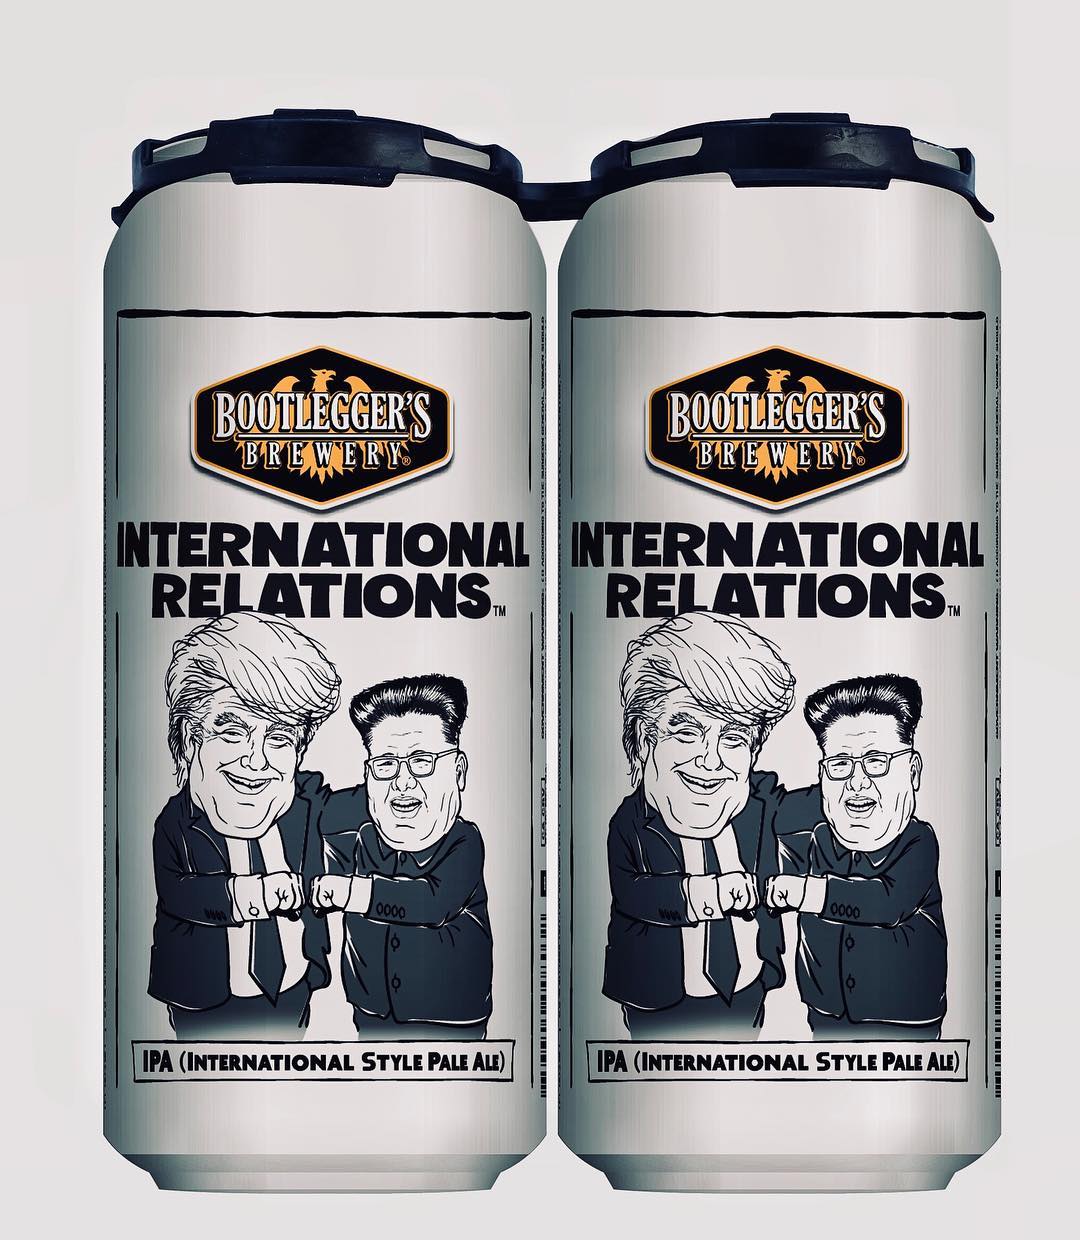 Bootleggers International Relations IPA 4 pack cans